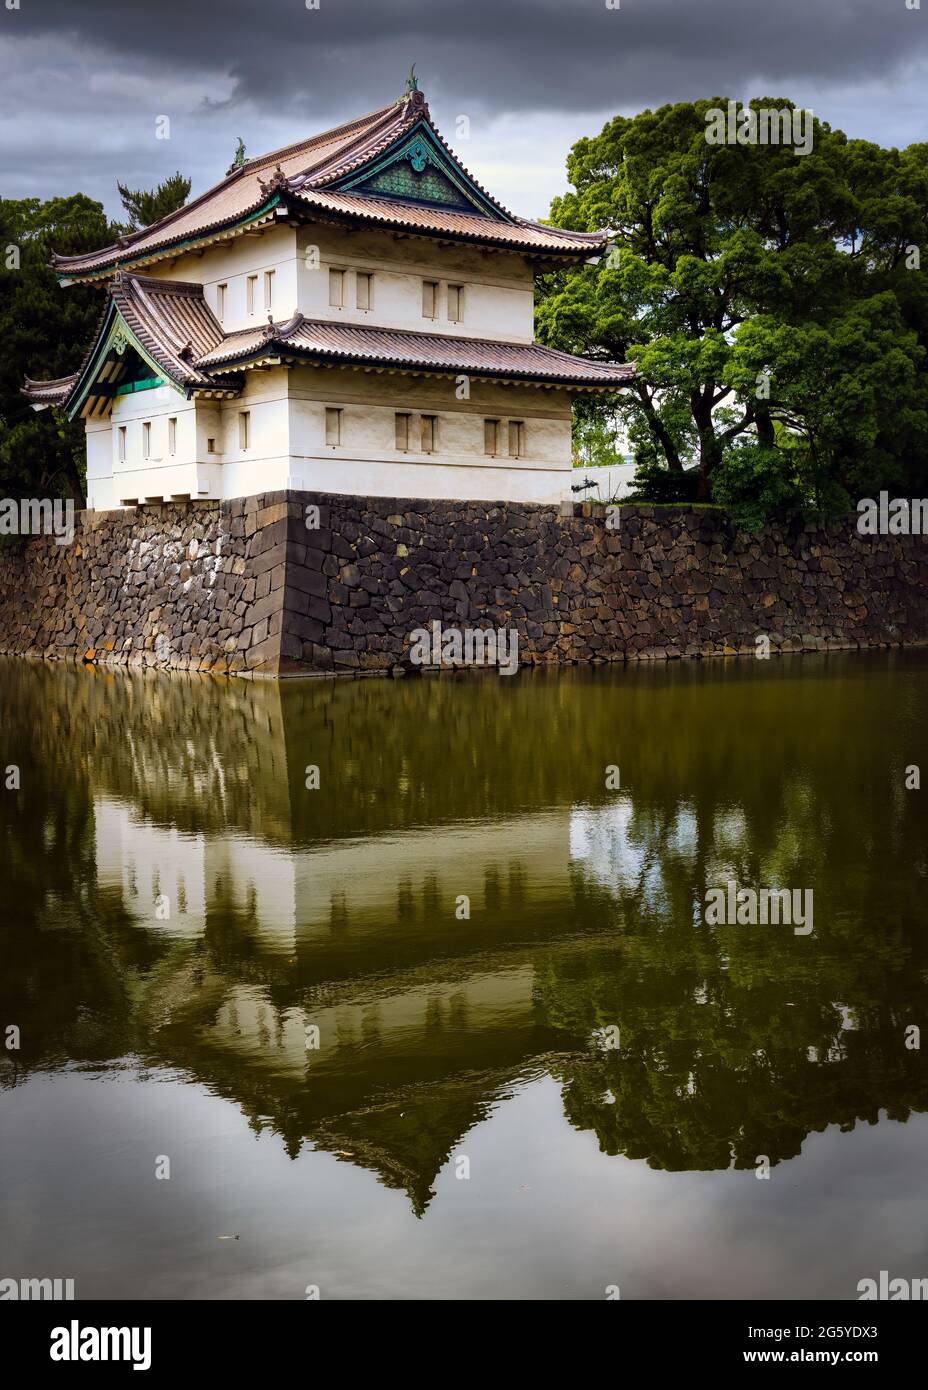 The grounds and moat of the Japanese Imperial Palace in Tokyo, Japan. Stock Photo